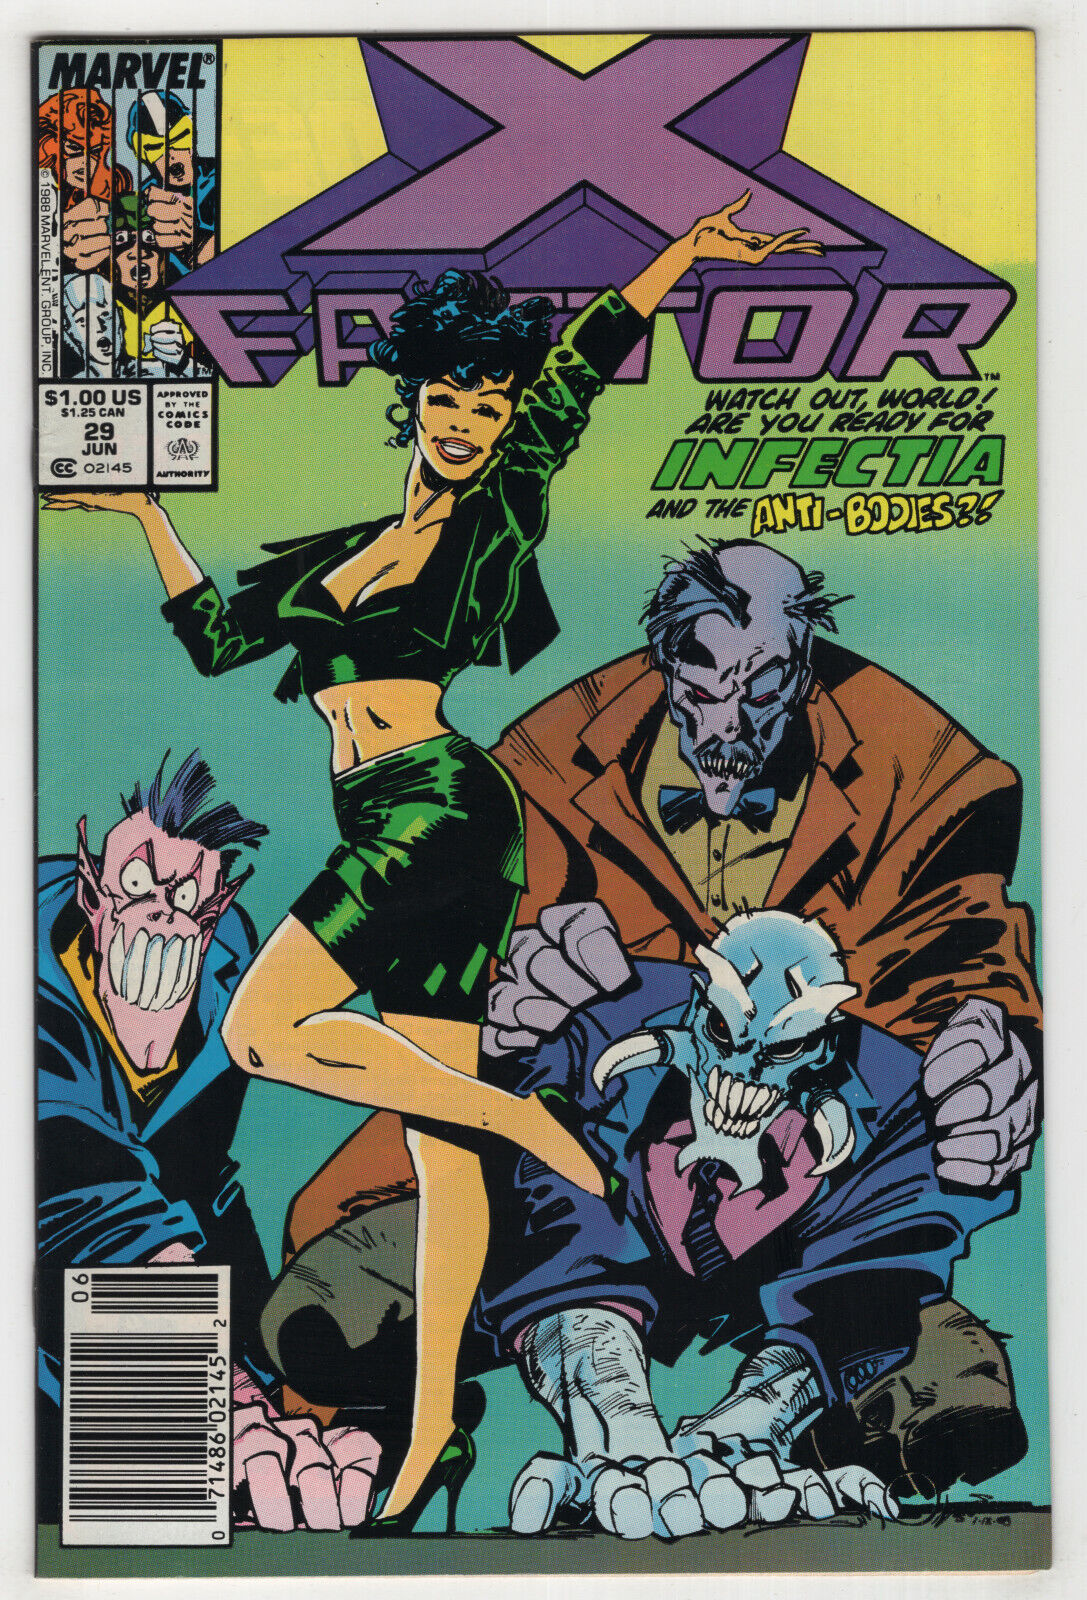 X-Factor #29 (Jun 1988, Marvel) Infectia [Choose From] Newsstand or Direct